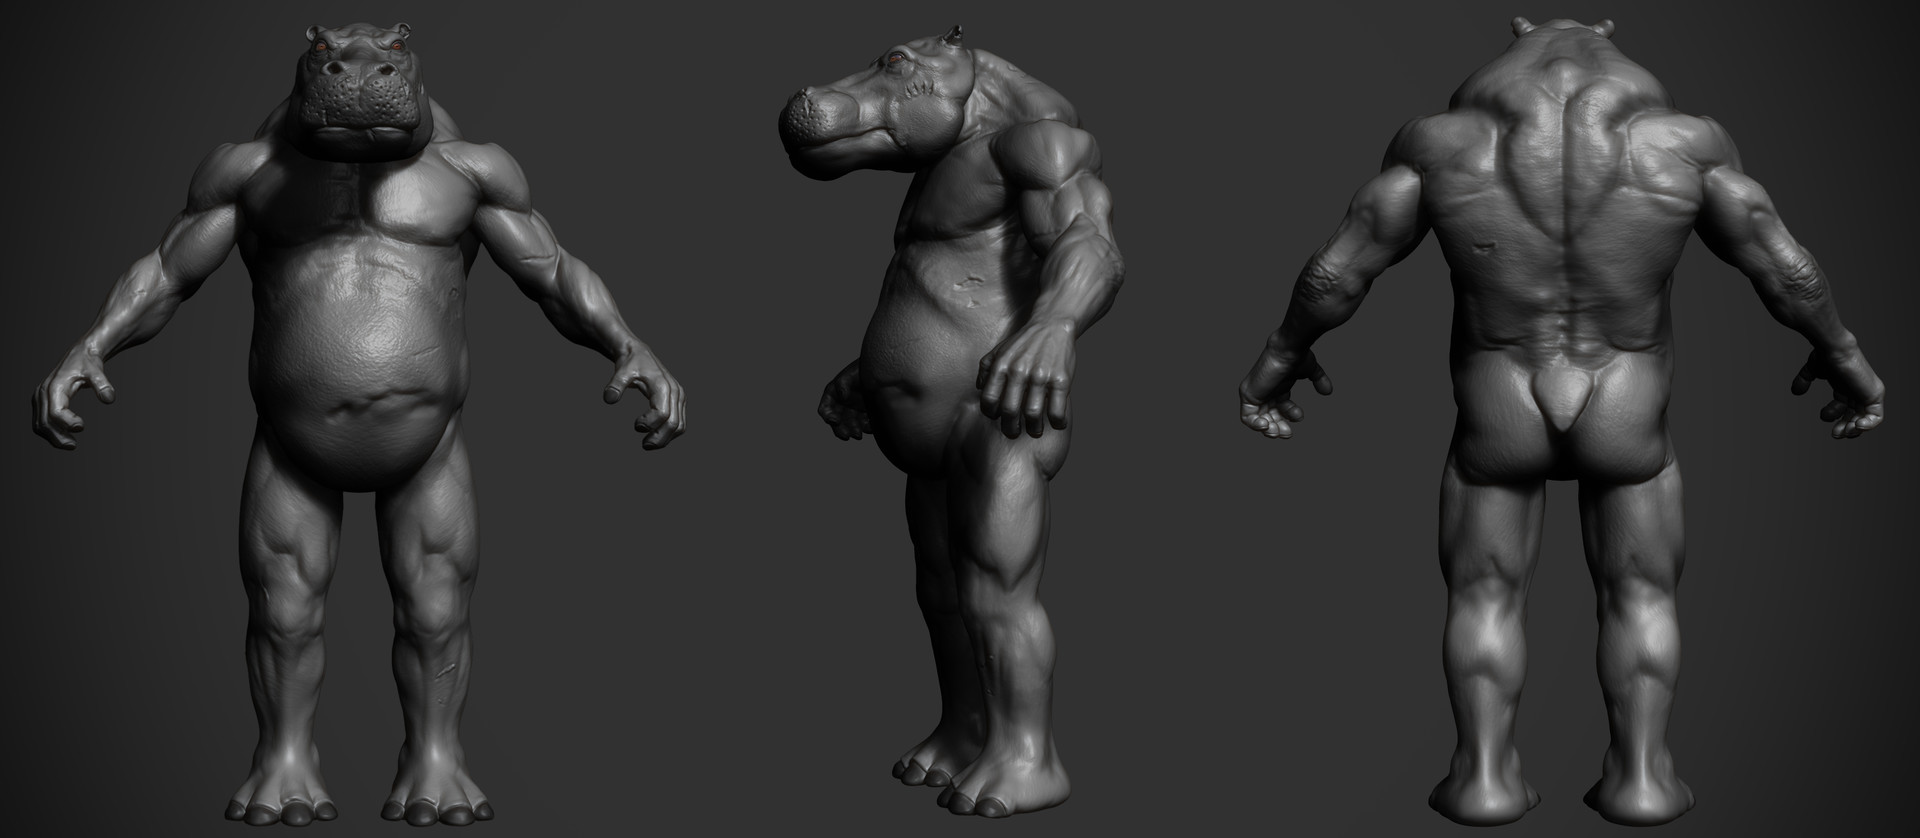 omar-chaouch-hippo-animal-warrior-omar-chaouch-wip-04.jpg